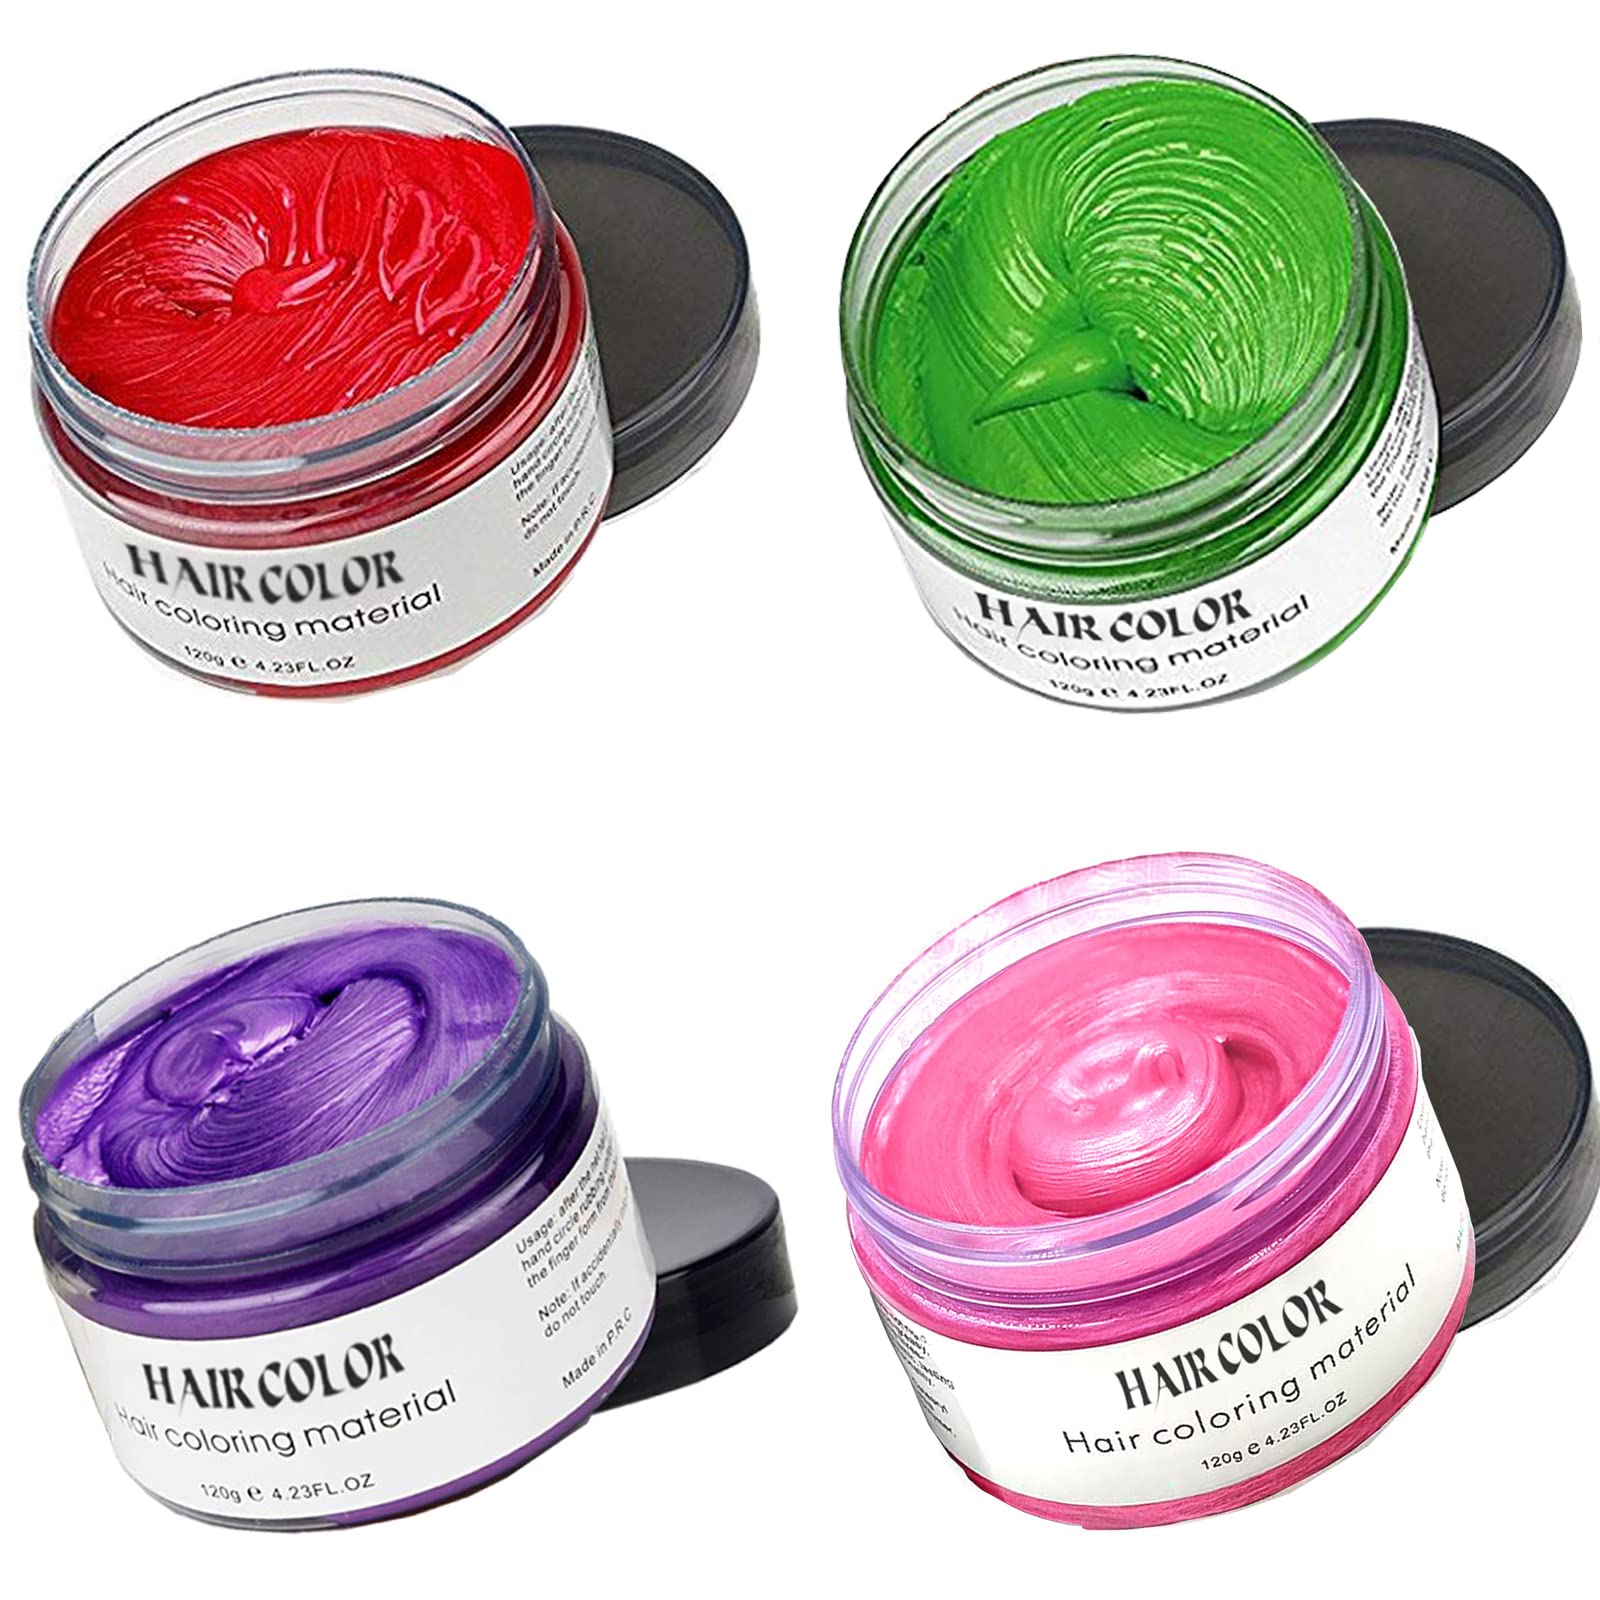 Temporary Hair Color Acosexy Green Red Pink Purple Hair Dye Wax,Instant Hairstyle Hair Spray,Natural Temporary Hair Coloring Wax Material Disposable Hair Styling Clays Ash for Cosplay,Party,Masquerade,Halloween.etc (4 Color-Green Red Purple Pink)